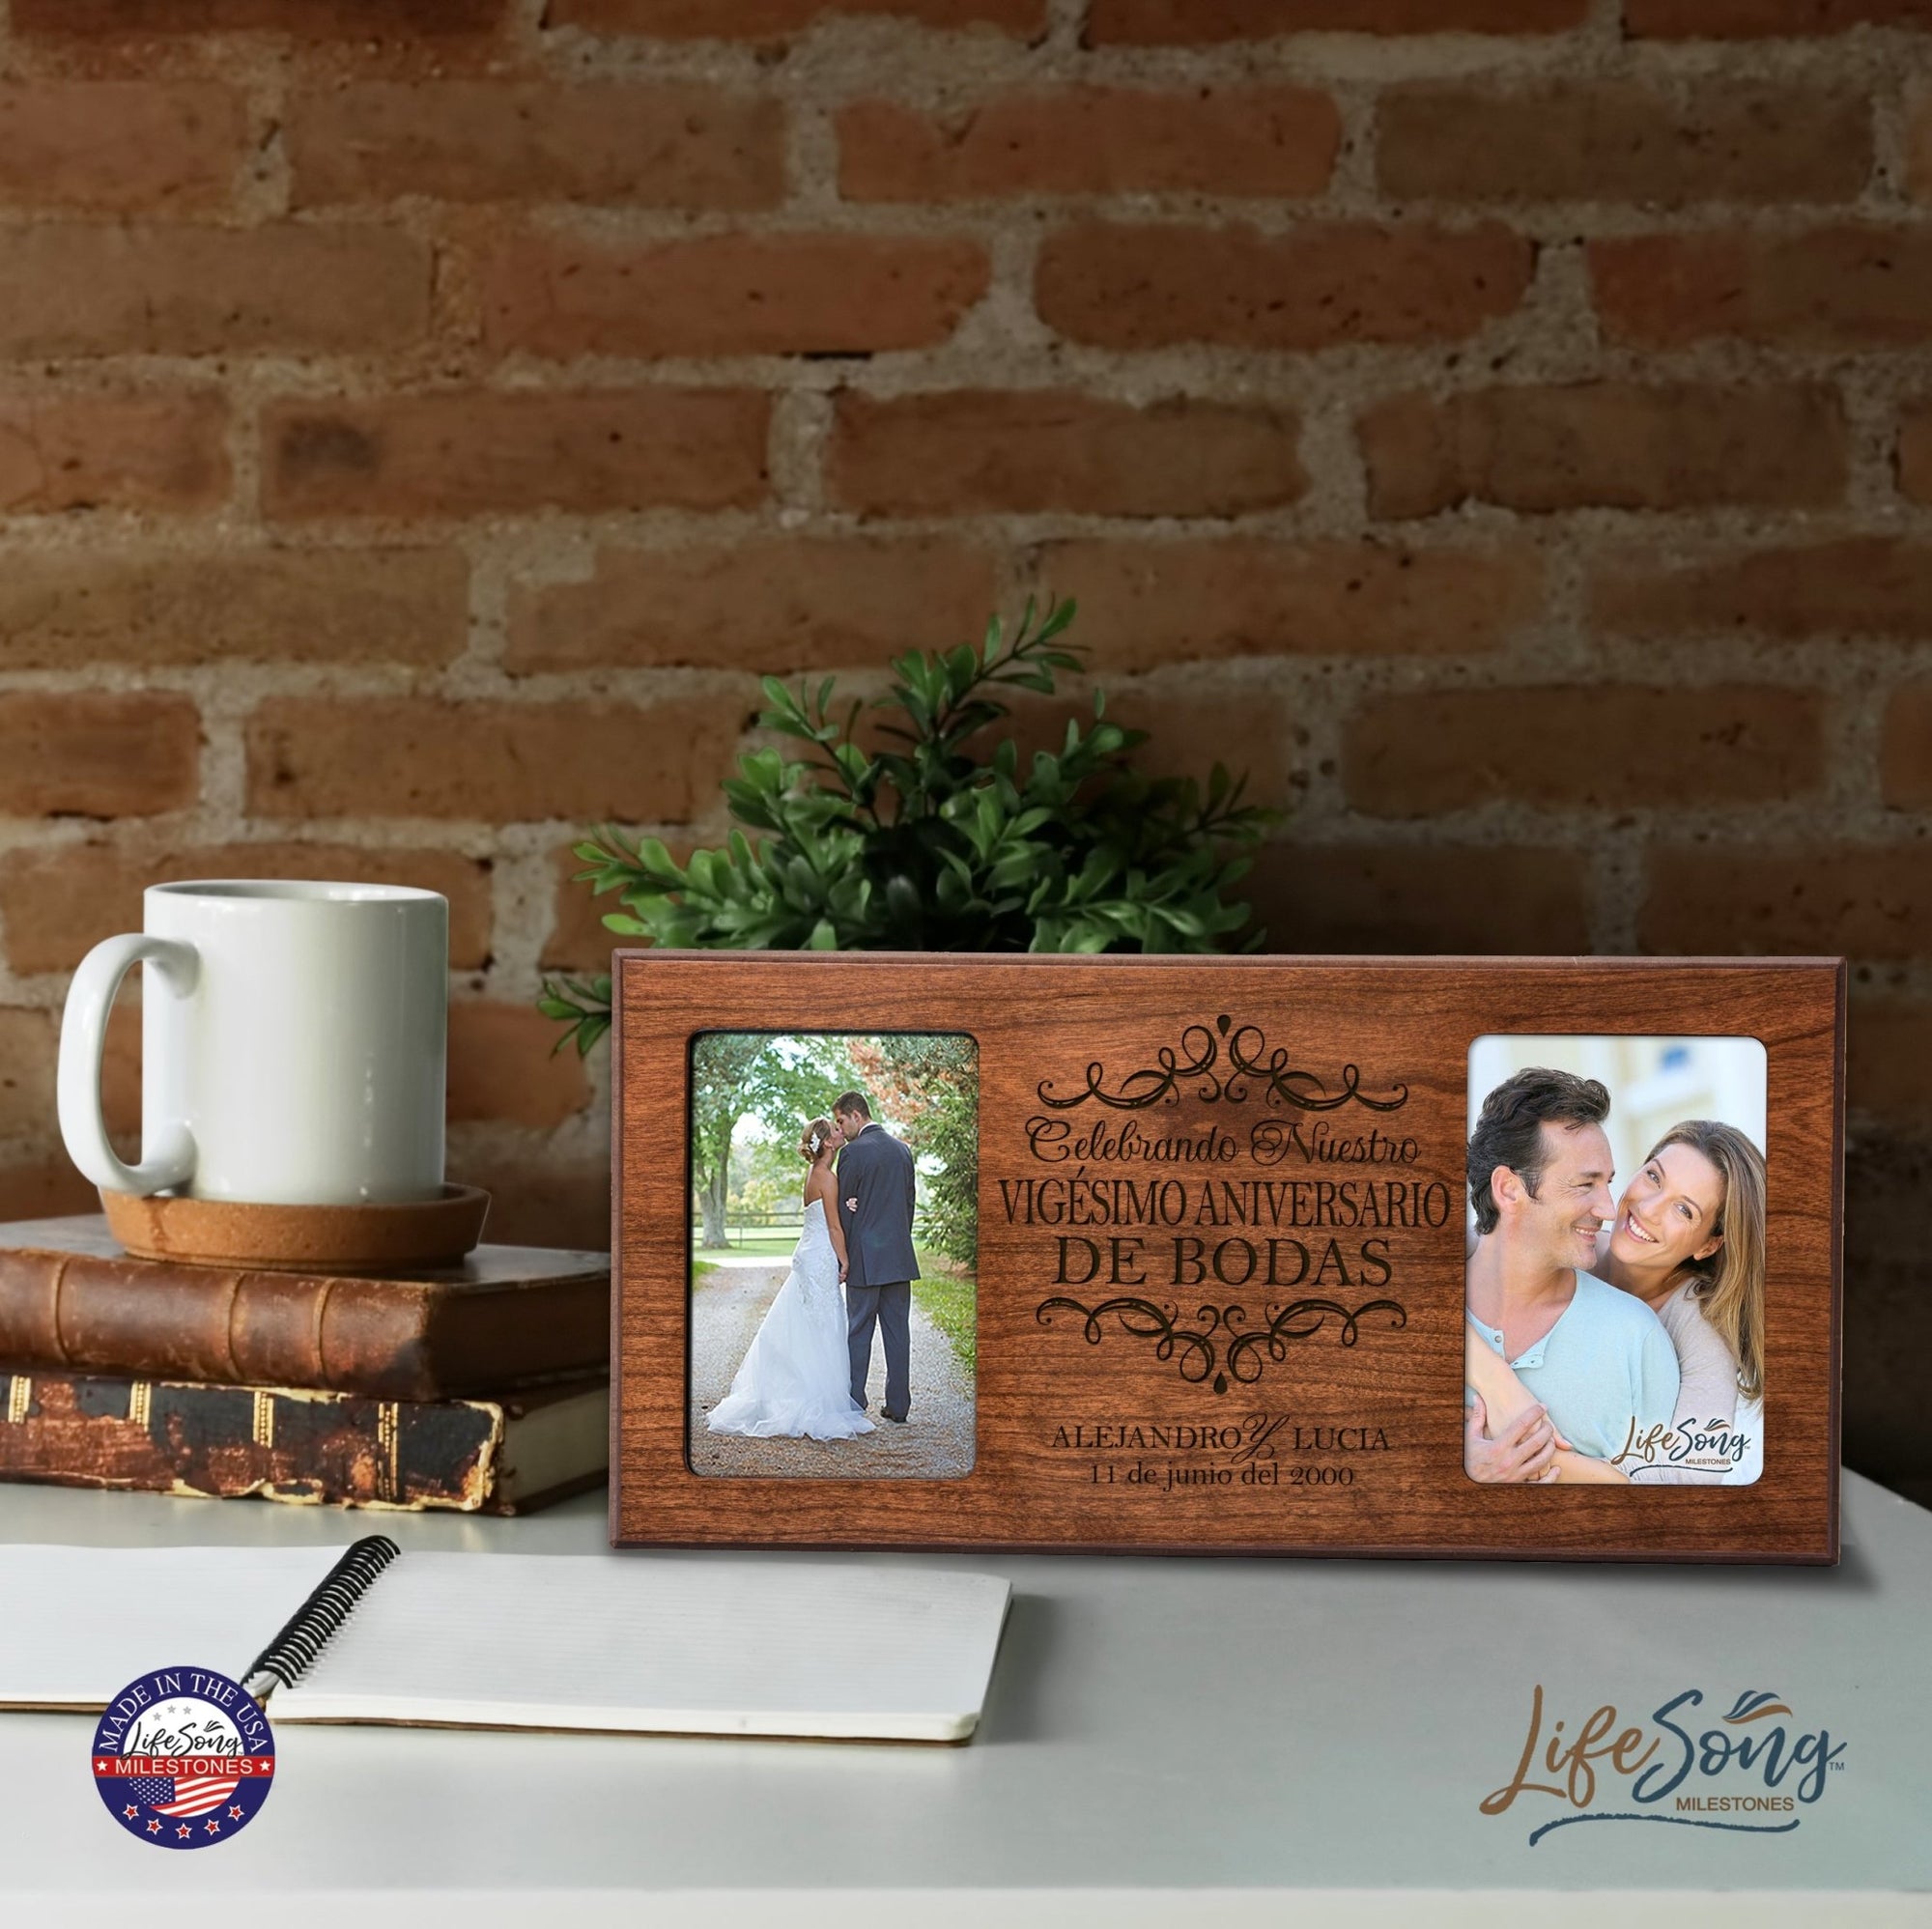 Lifesong Milestones Personalized 20th Wedding Anniversary Spanish Picture Frame Decorations